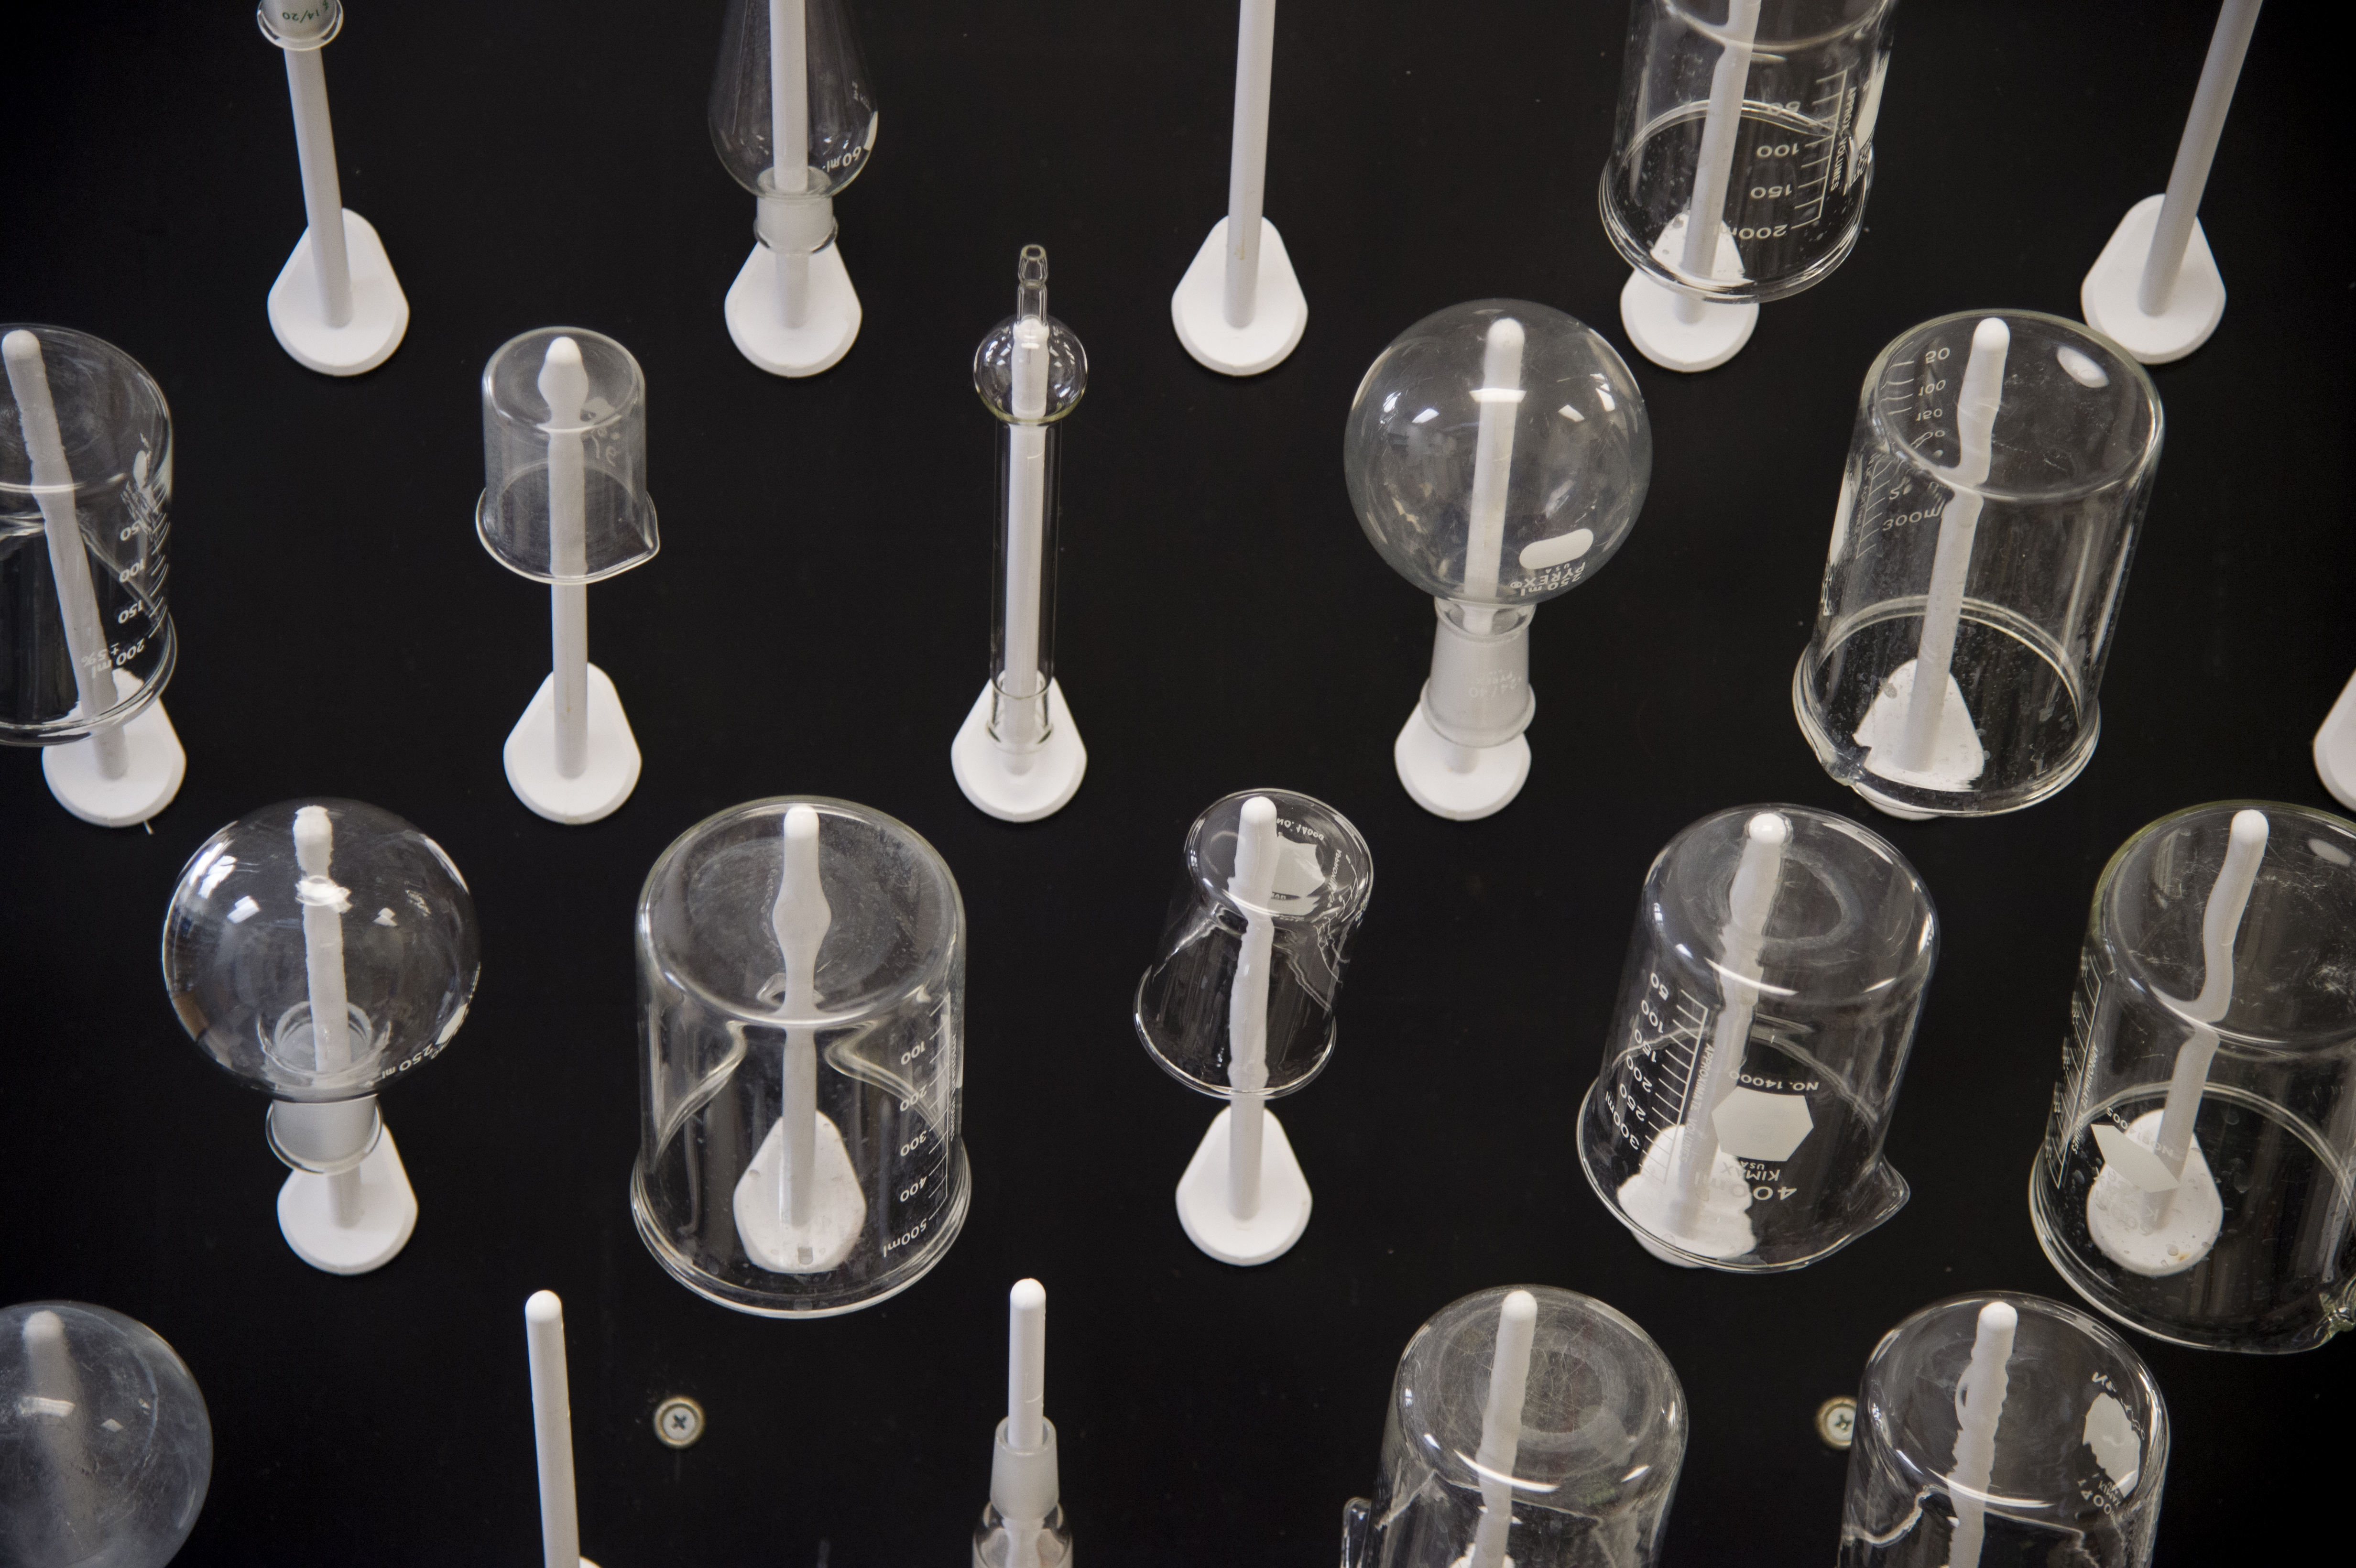 Photo of various beakers and flasks lined up on a black background to show off the various sizes and shapes.